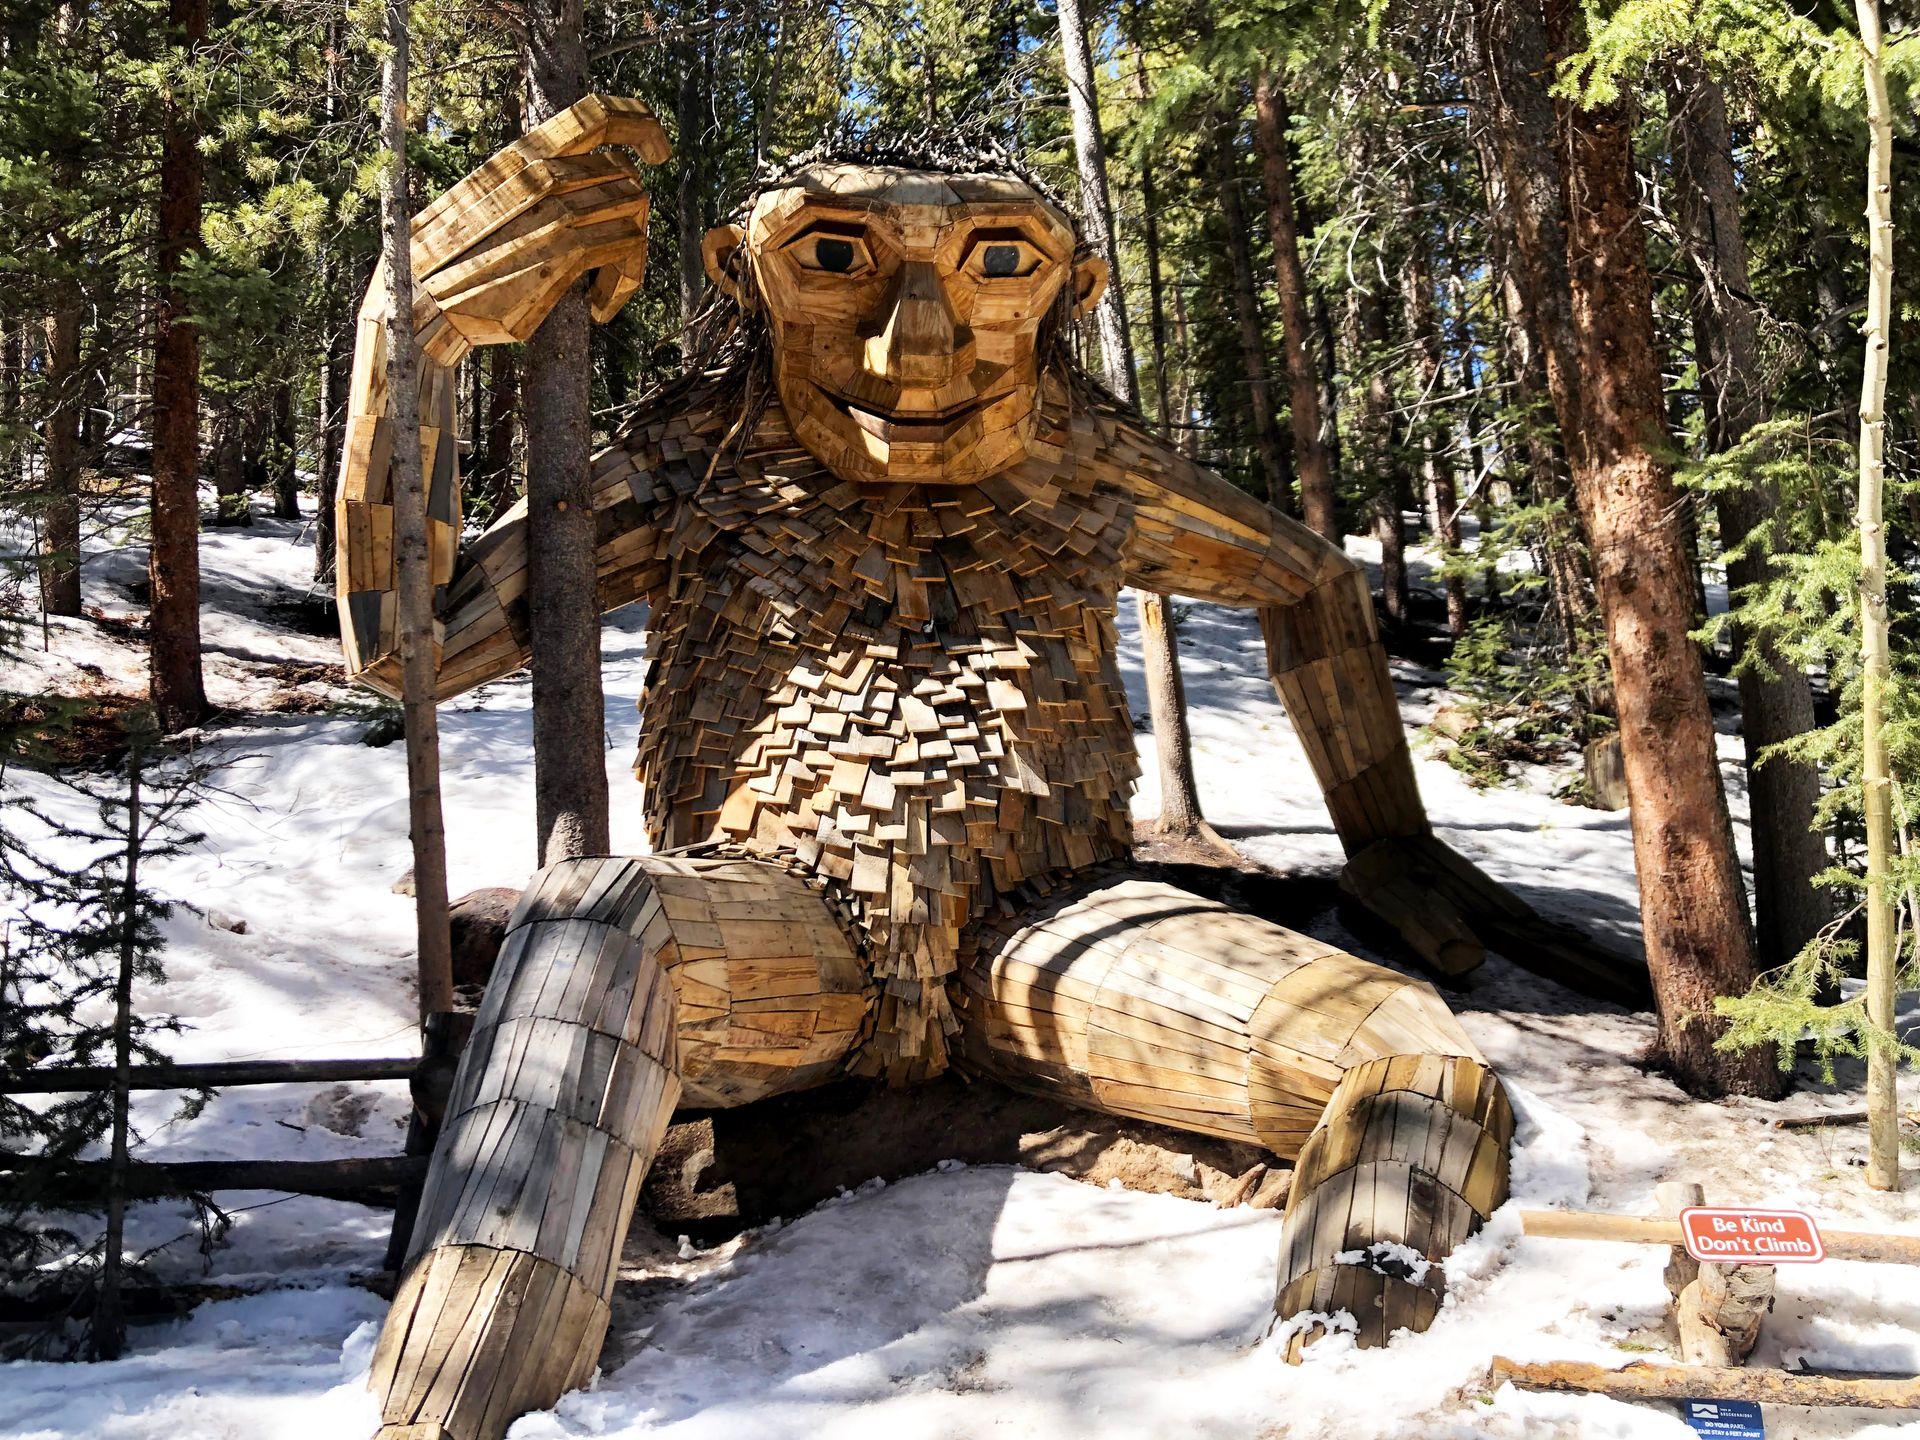 The Breckenridge Troll, a giant creature made out of wood that holds onto a tree.